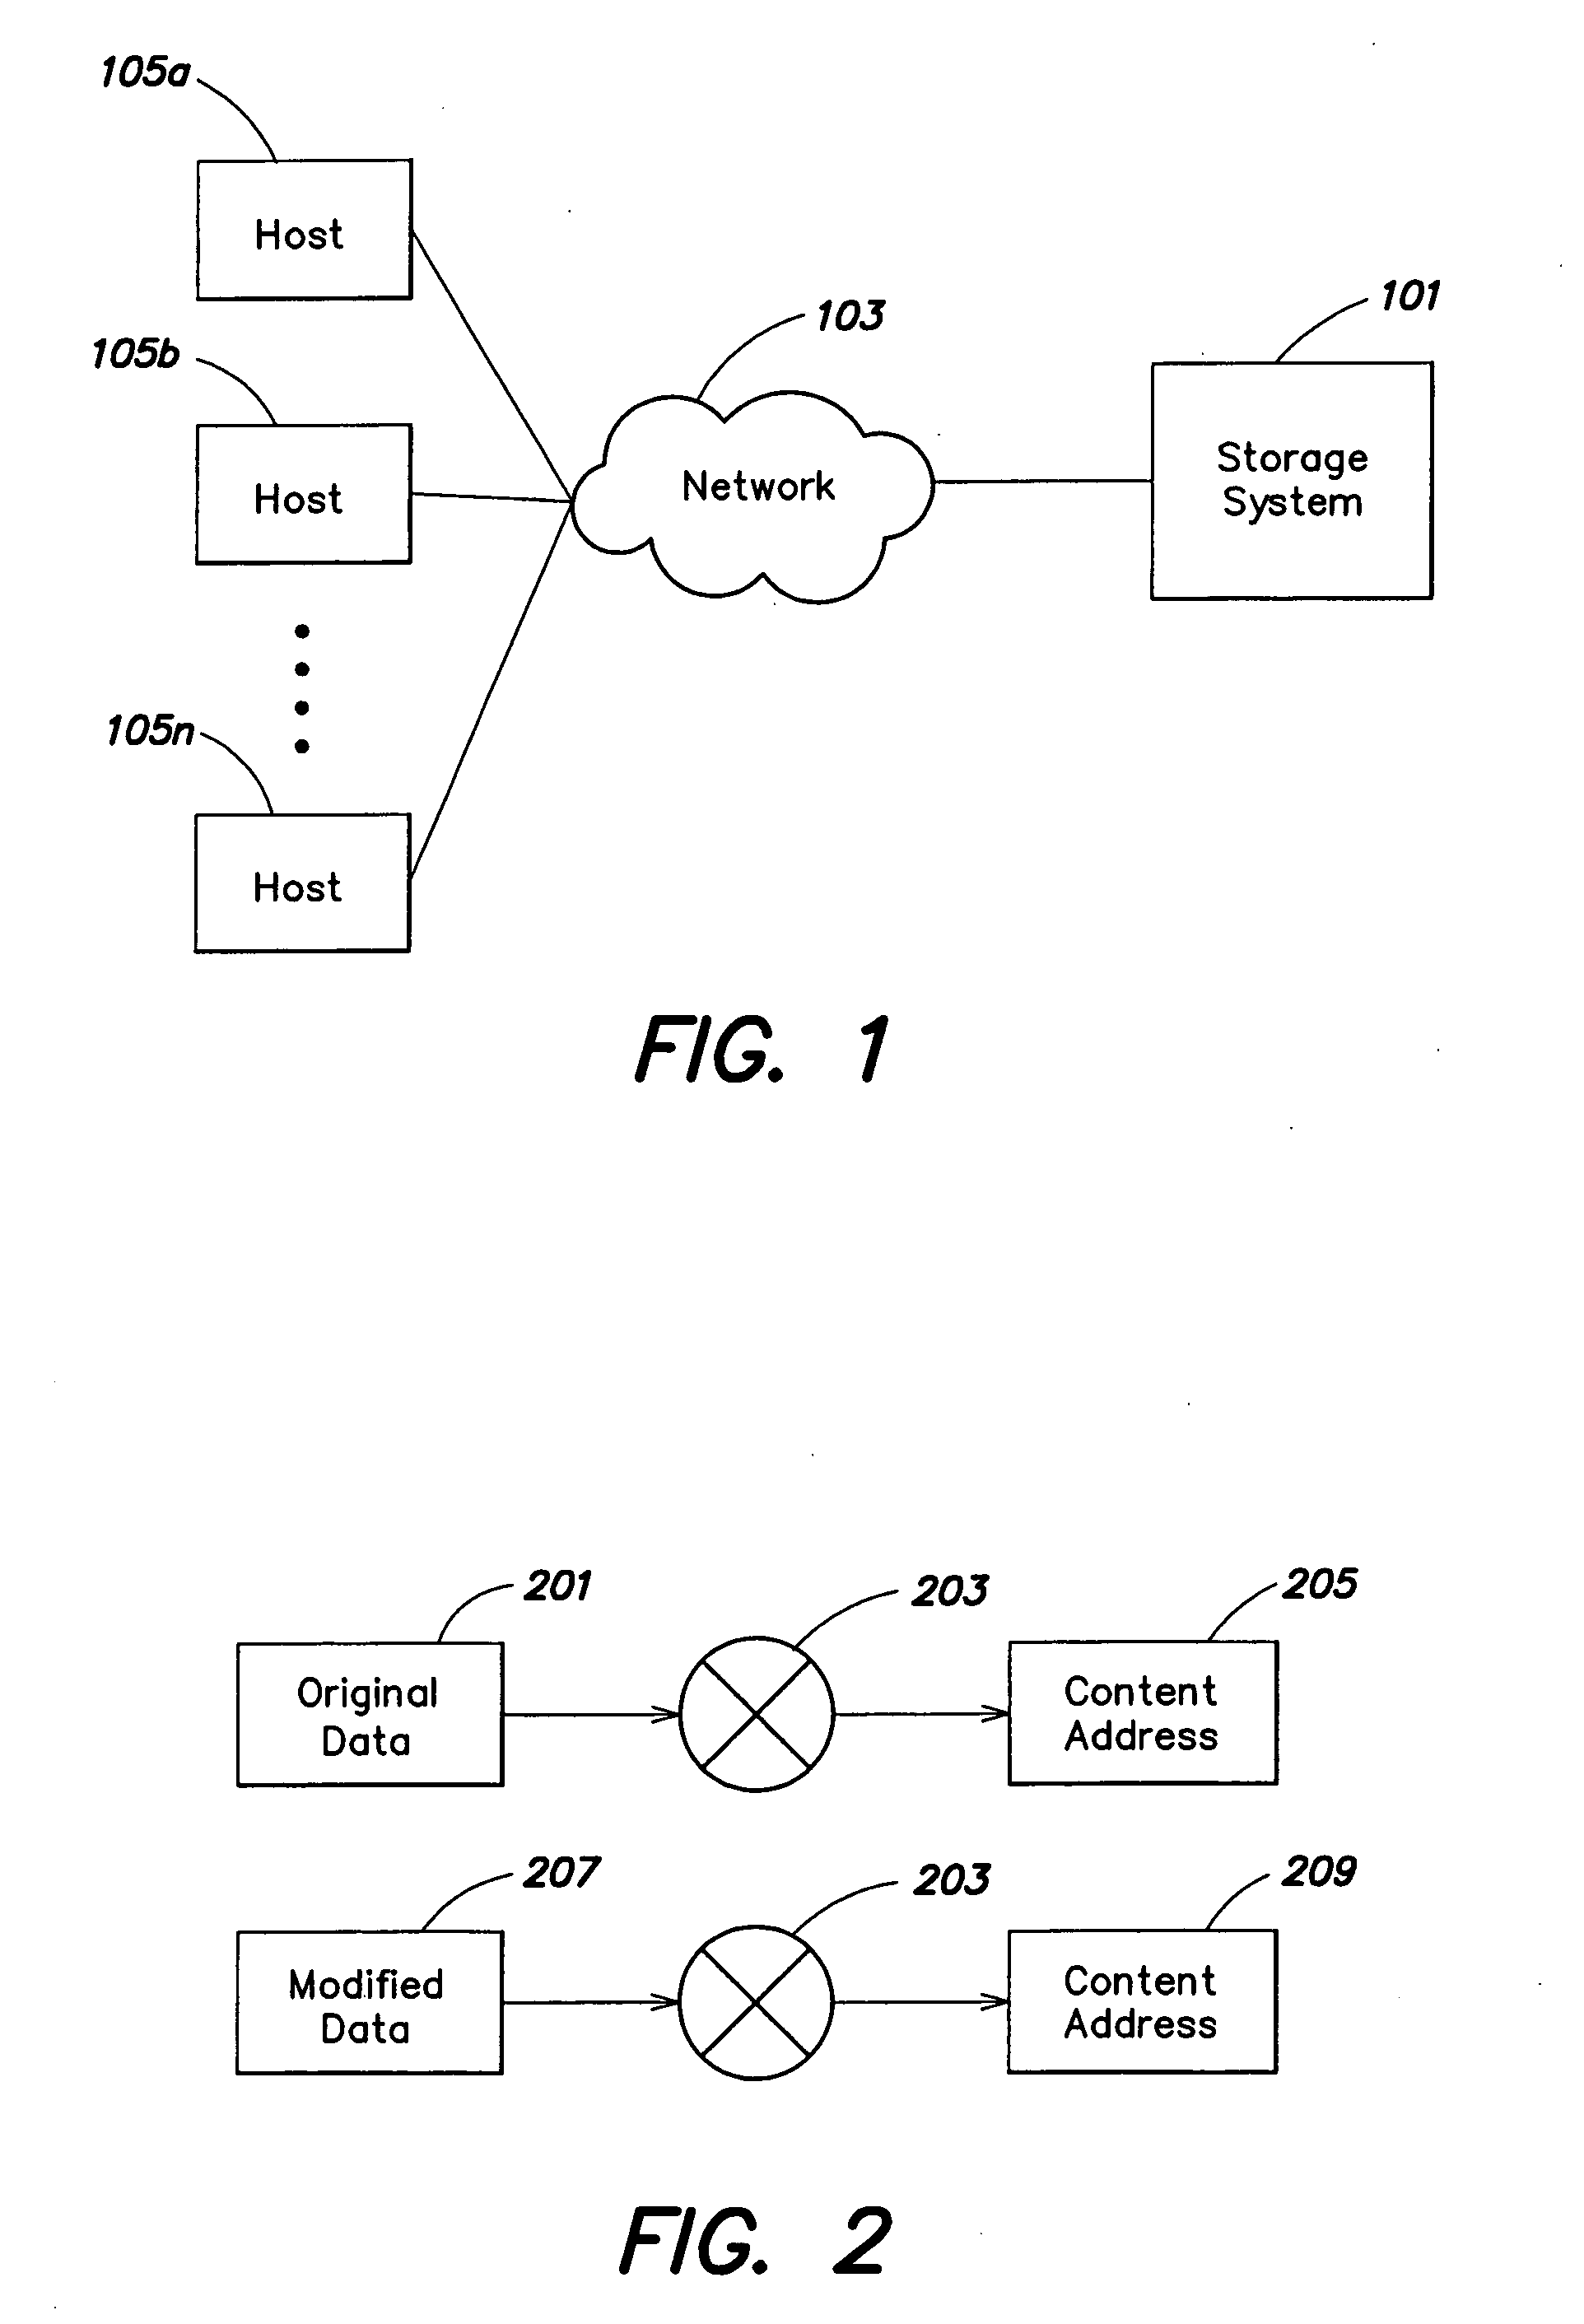 Methods and apparatus for secure modification of a retention period for data in a storage system